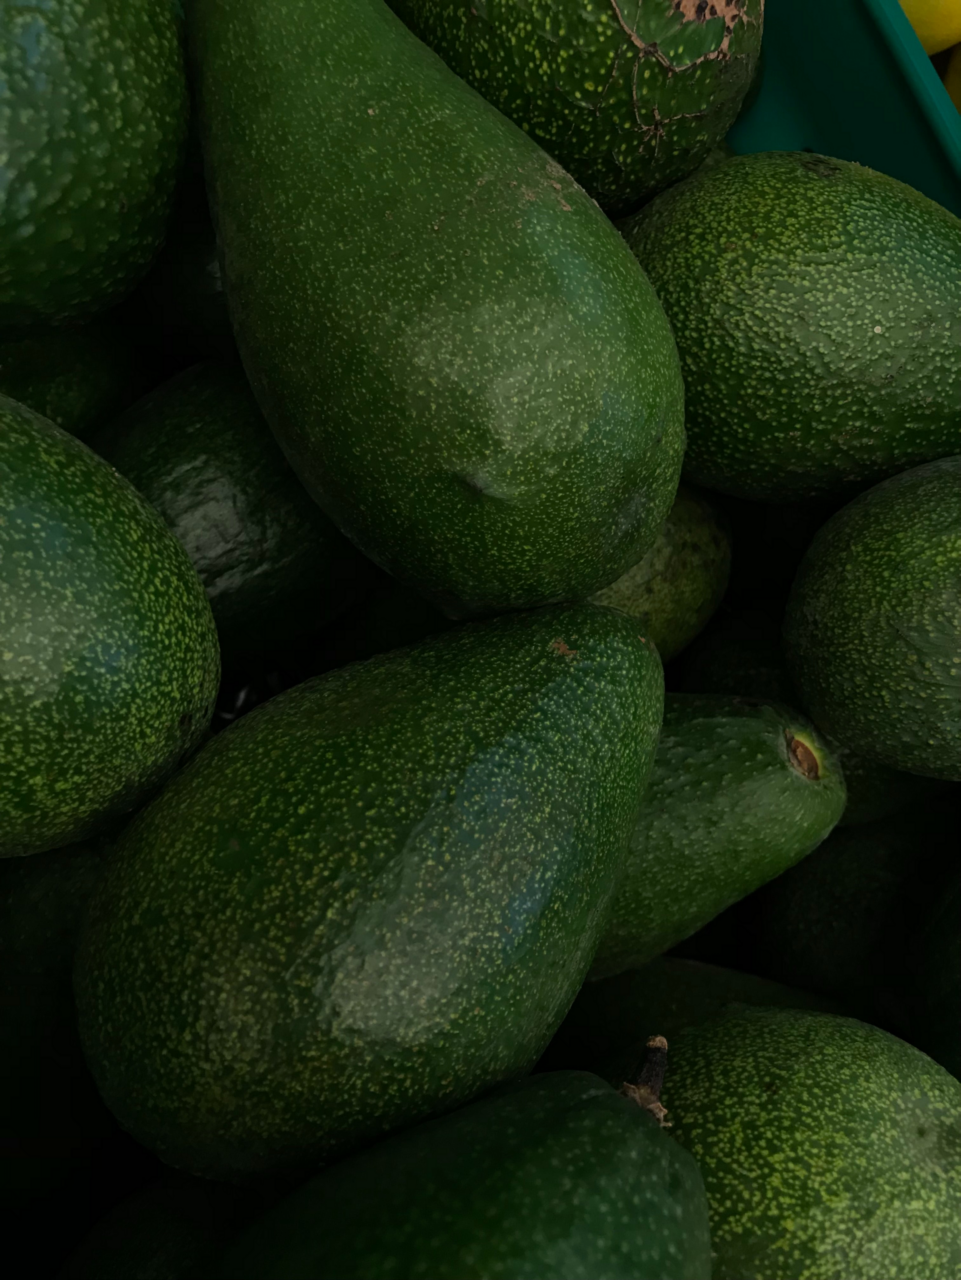 Image of a pile of avocados up close.